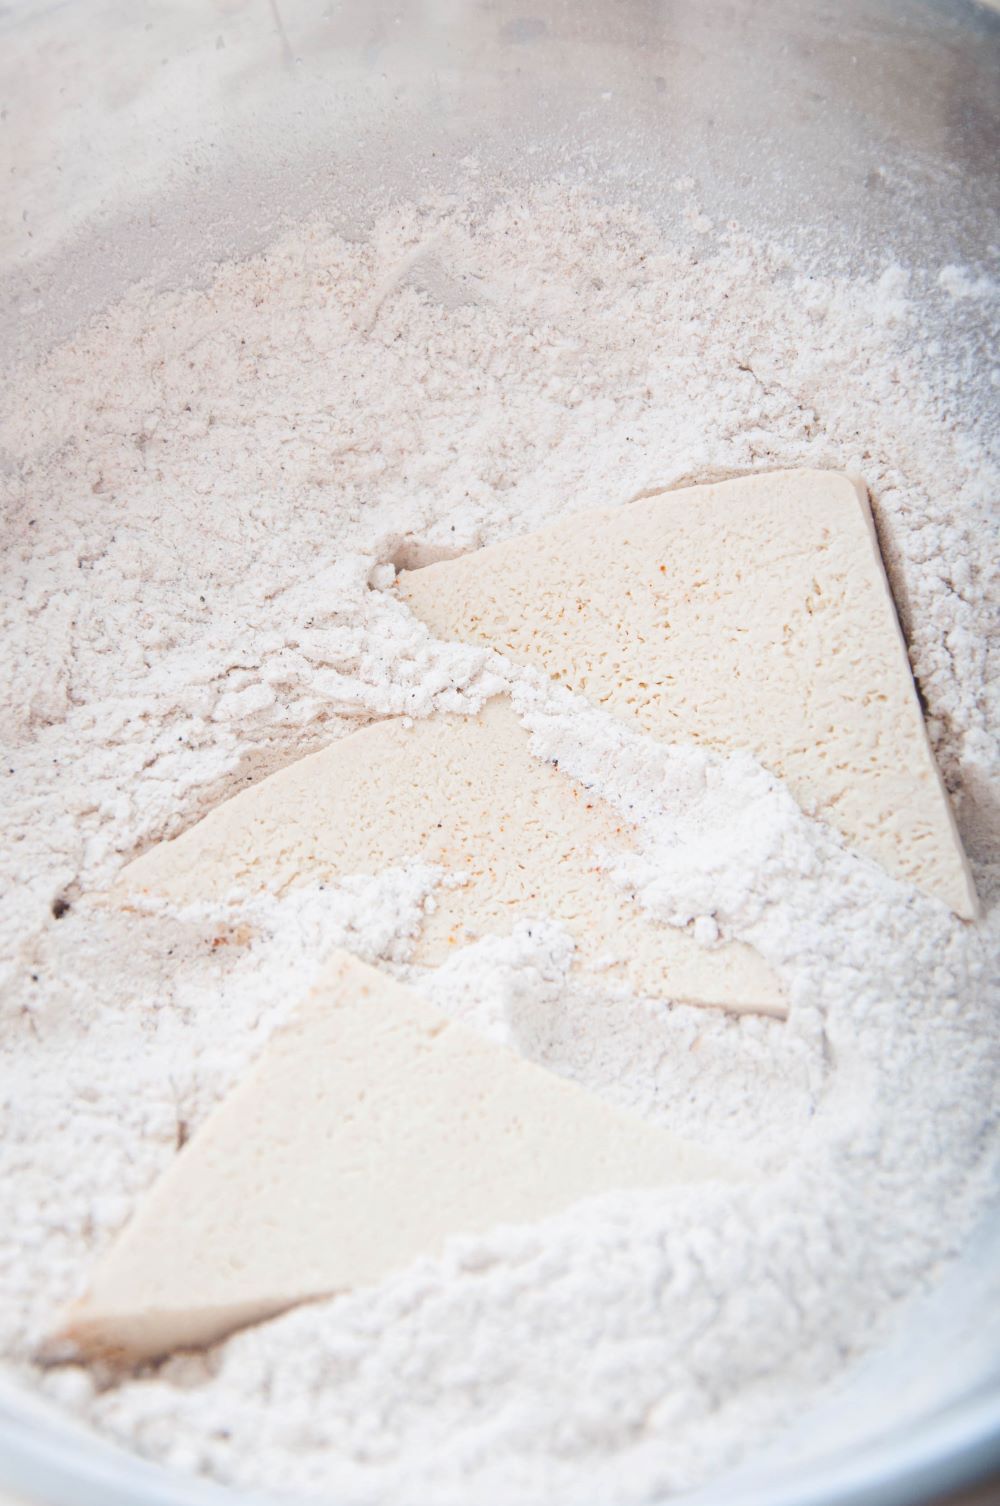 Tossing the tofu into the flour mixture